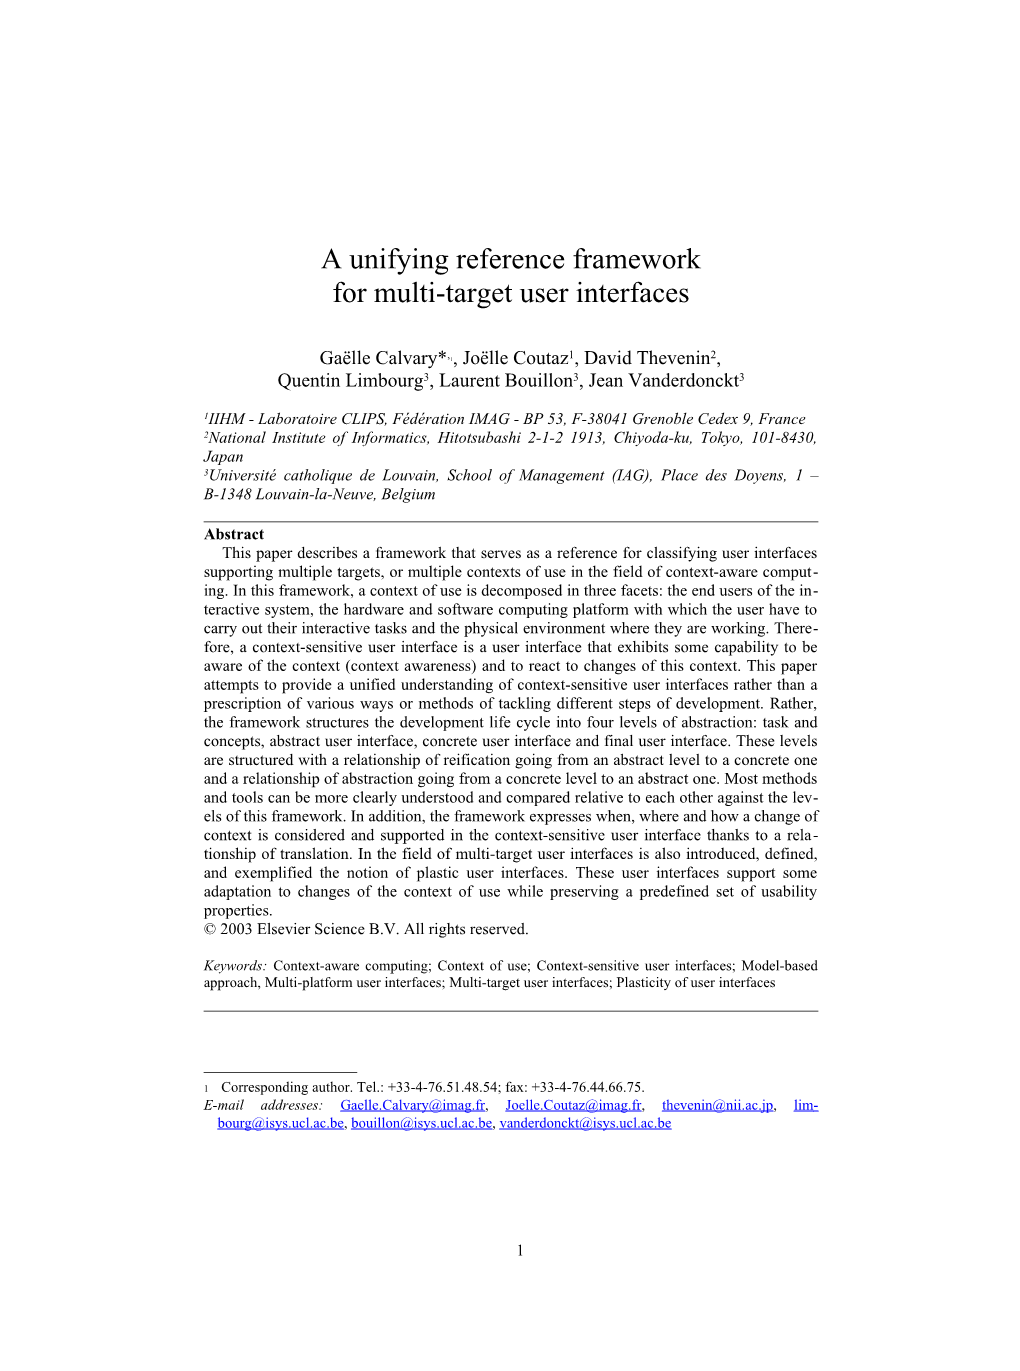 A Unifying Reference Framework for the Development